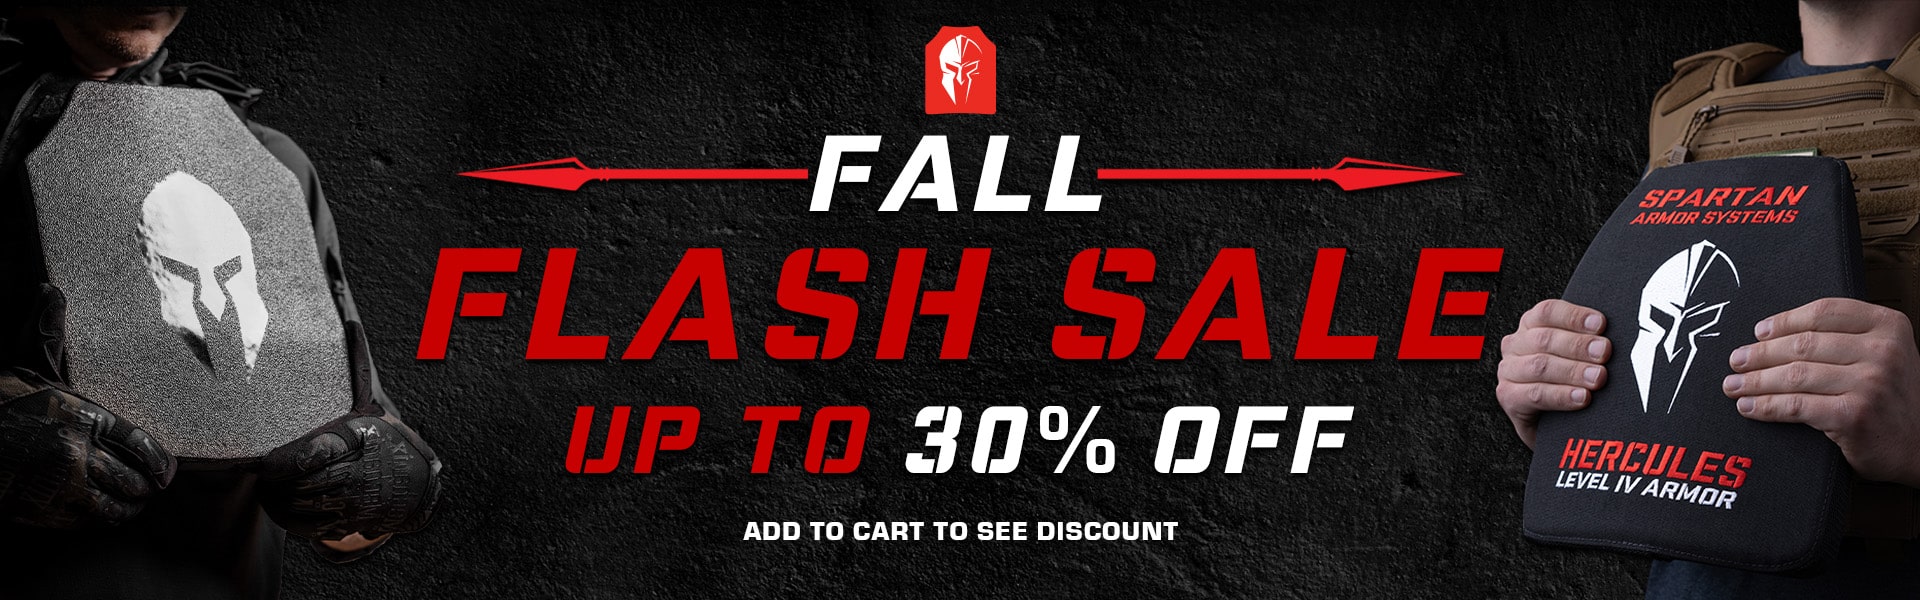 Fall Flash Sale - Save up to 30% off on select products